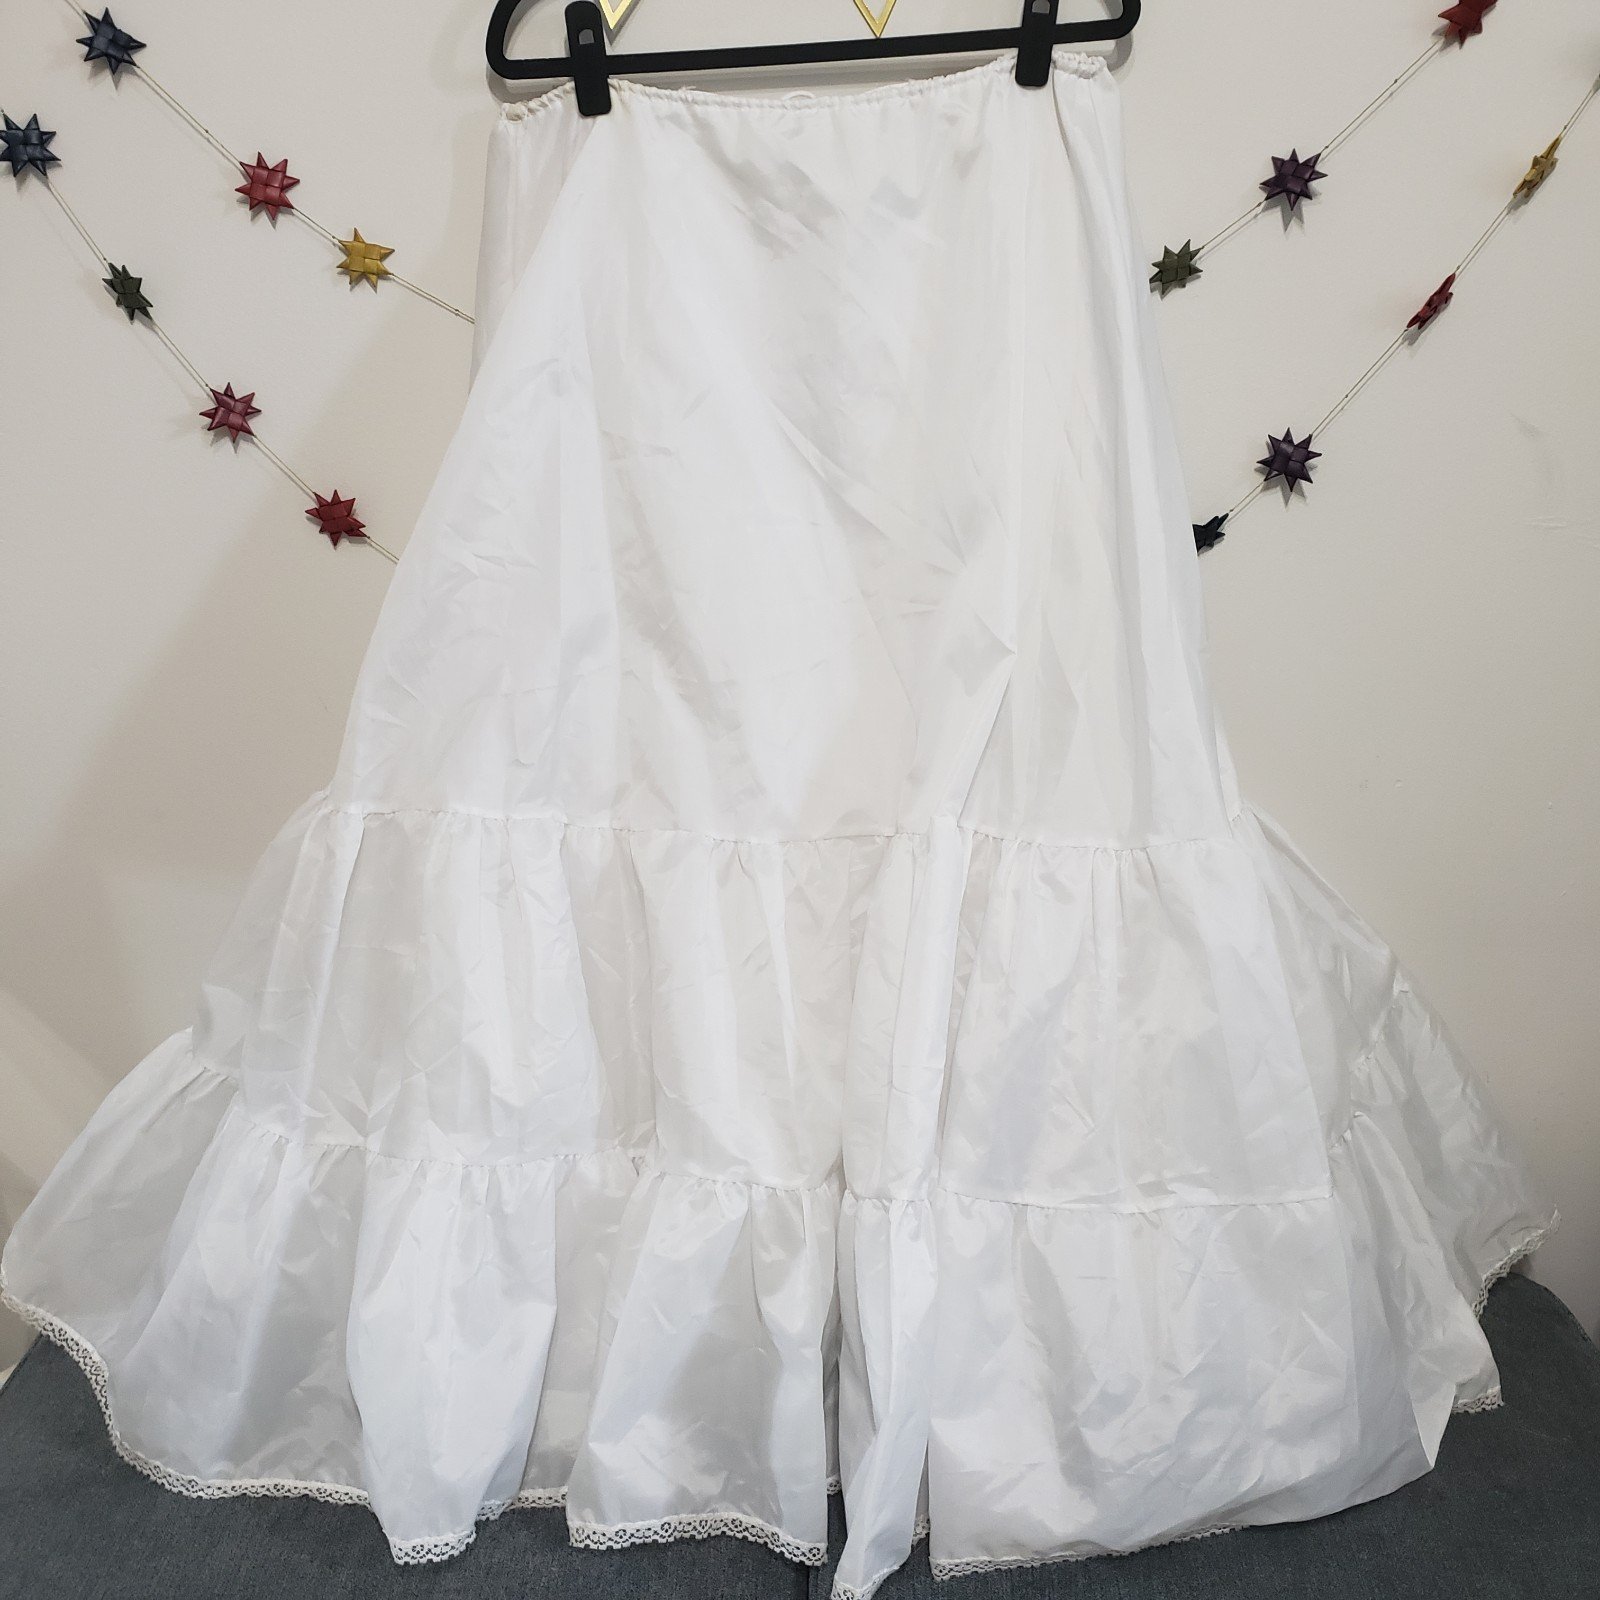 Discounted Darling brand vintage petticoat ju3jQaTgB Outlet Store